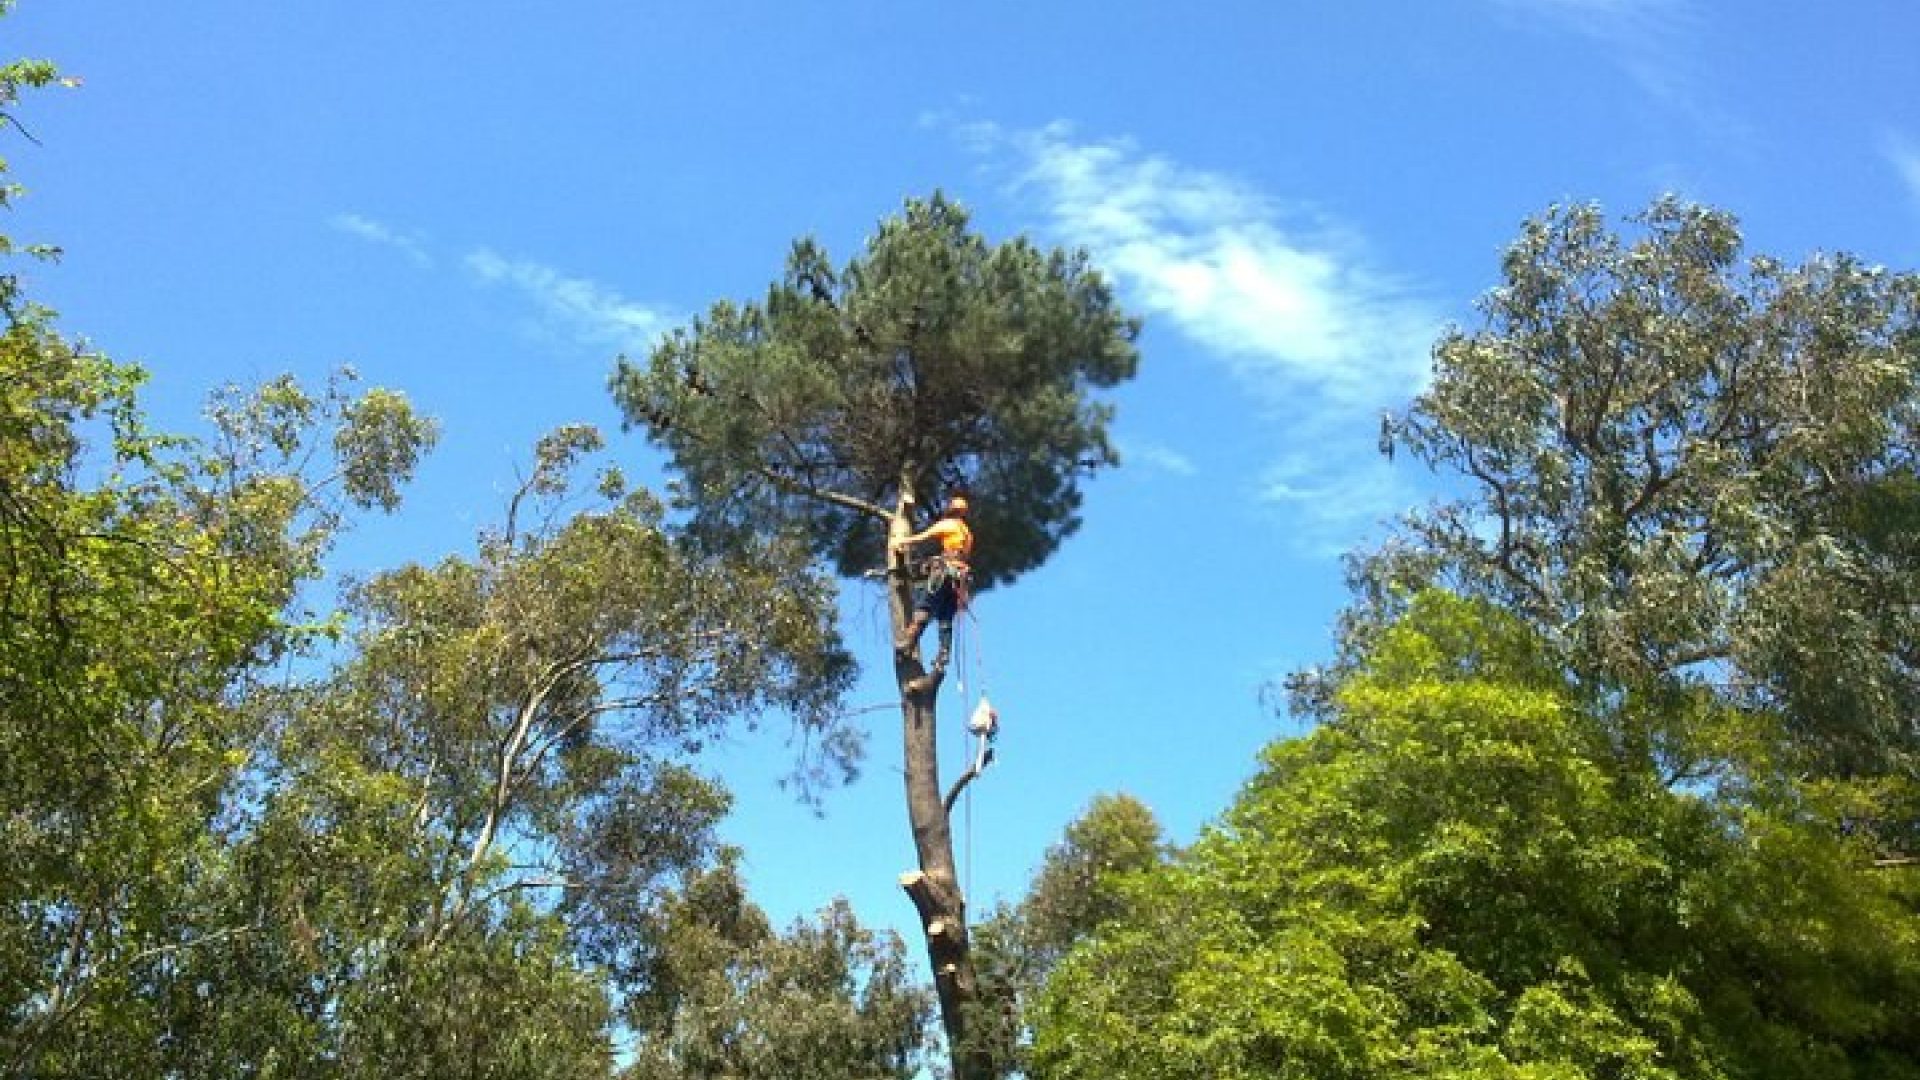 Somerville Tree Services - Removal - Pruning - Lopping - Trimming